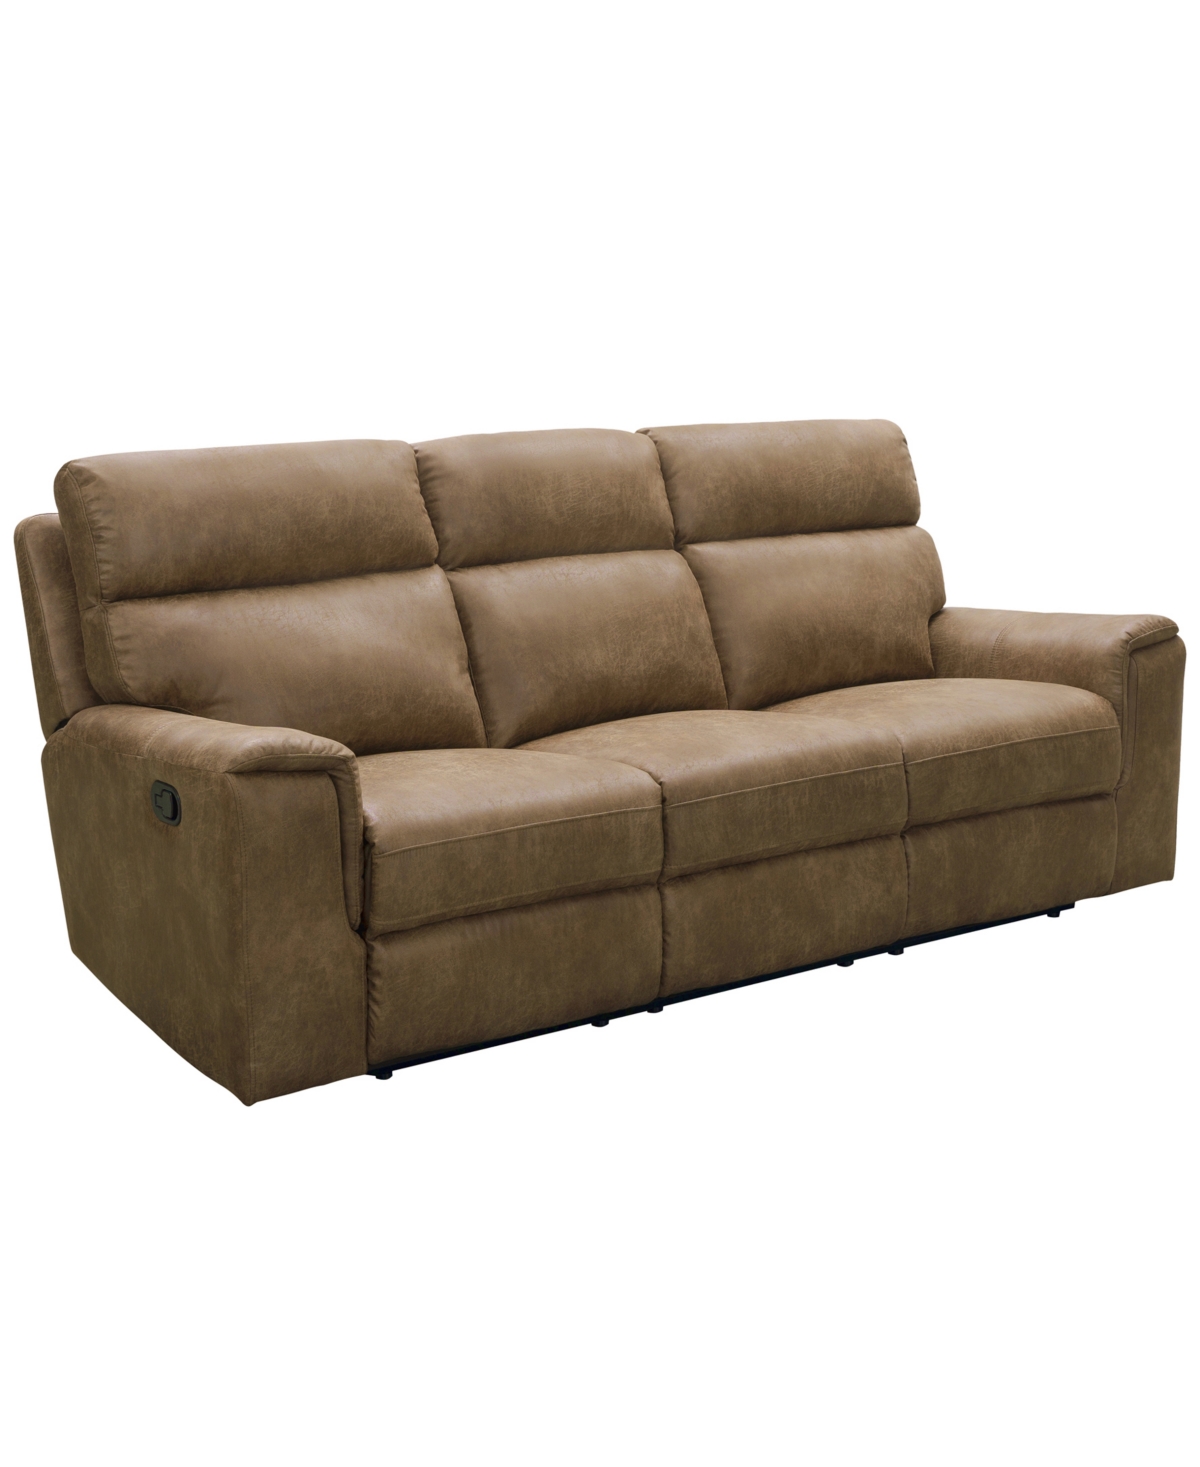 Abbyson Living Lawrence 39.5" Fabric Reclining Sofa In Camel